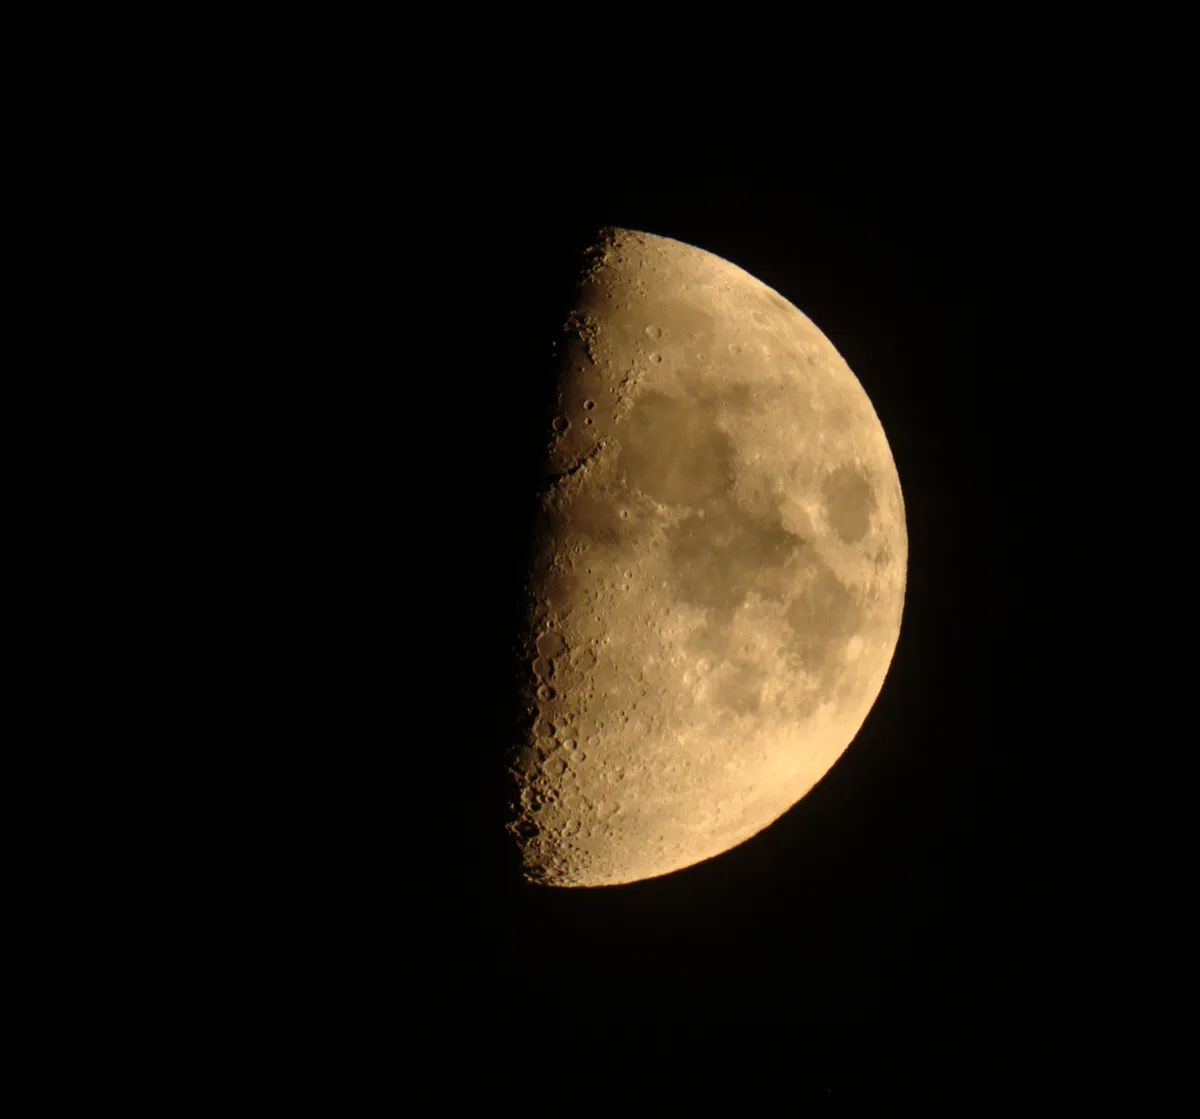 First ever lunar shot by Raymond Burling, Isle of Dogs, London, UK. Equipment: Canon 550D, SW80ED (Prime Focus)